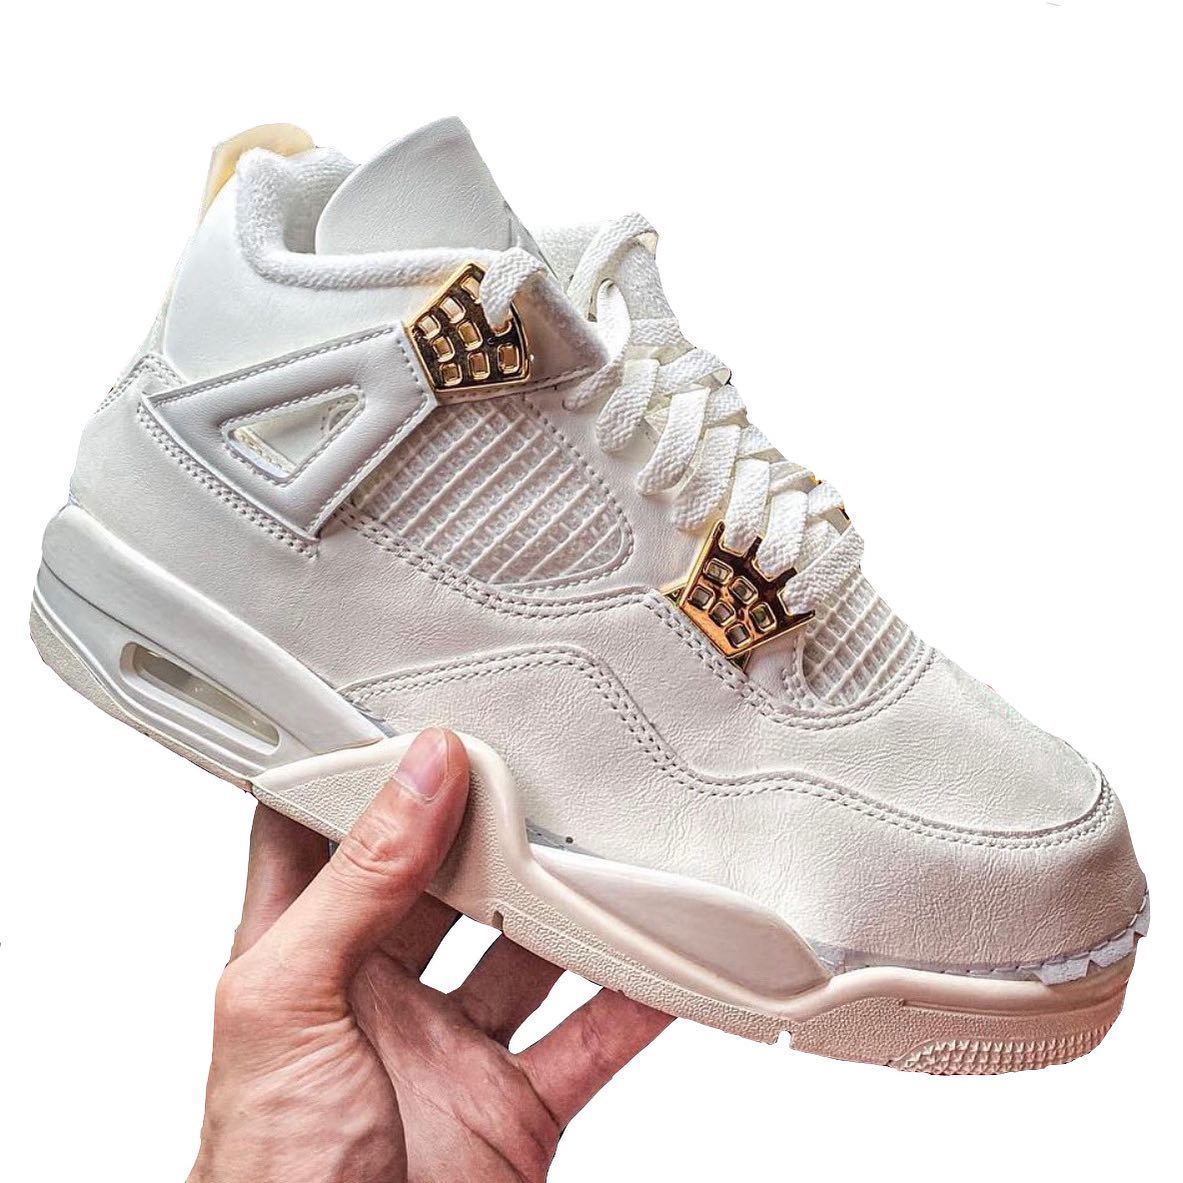 A New (Gilded) Air Jordan 4 "Sail" Releases Spring 2024